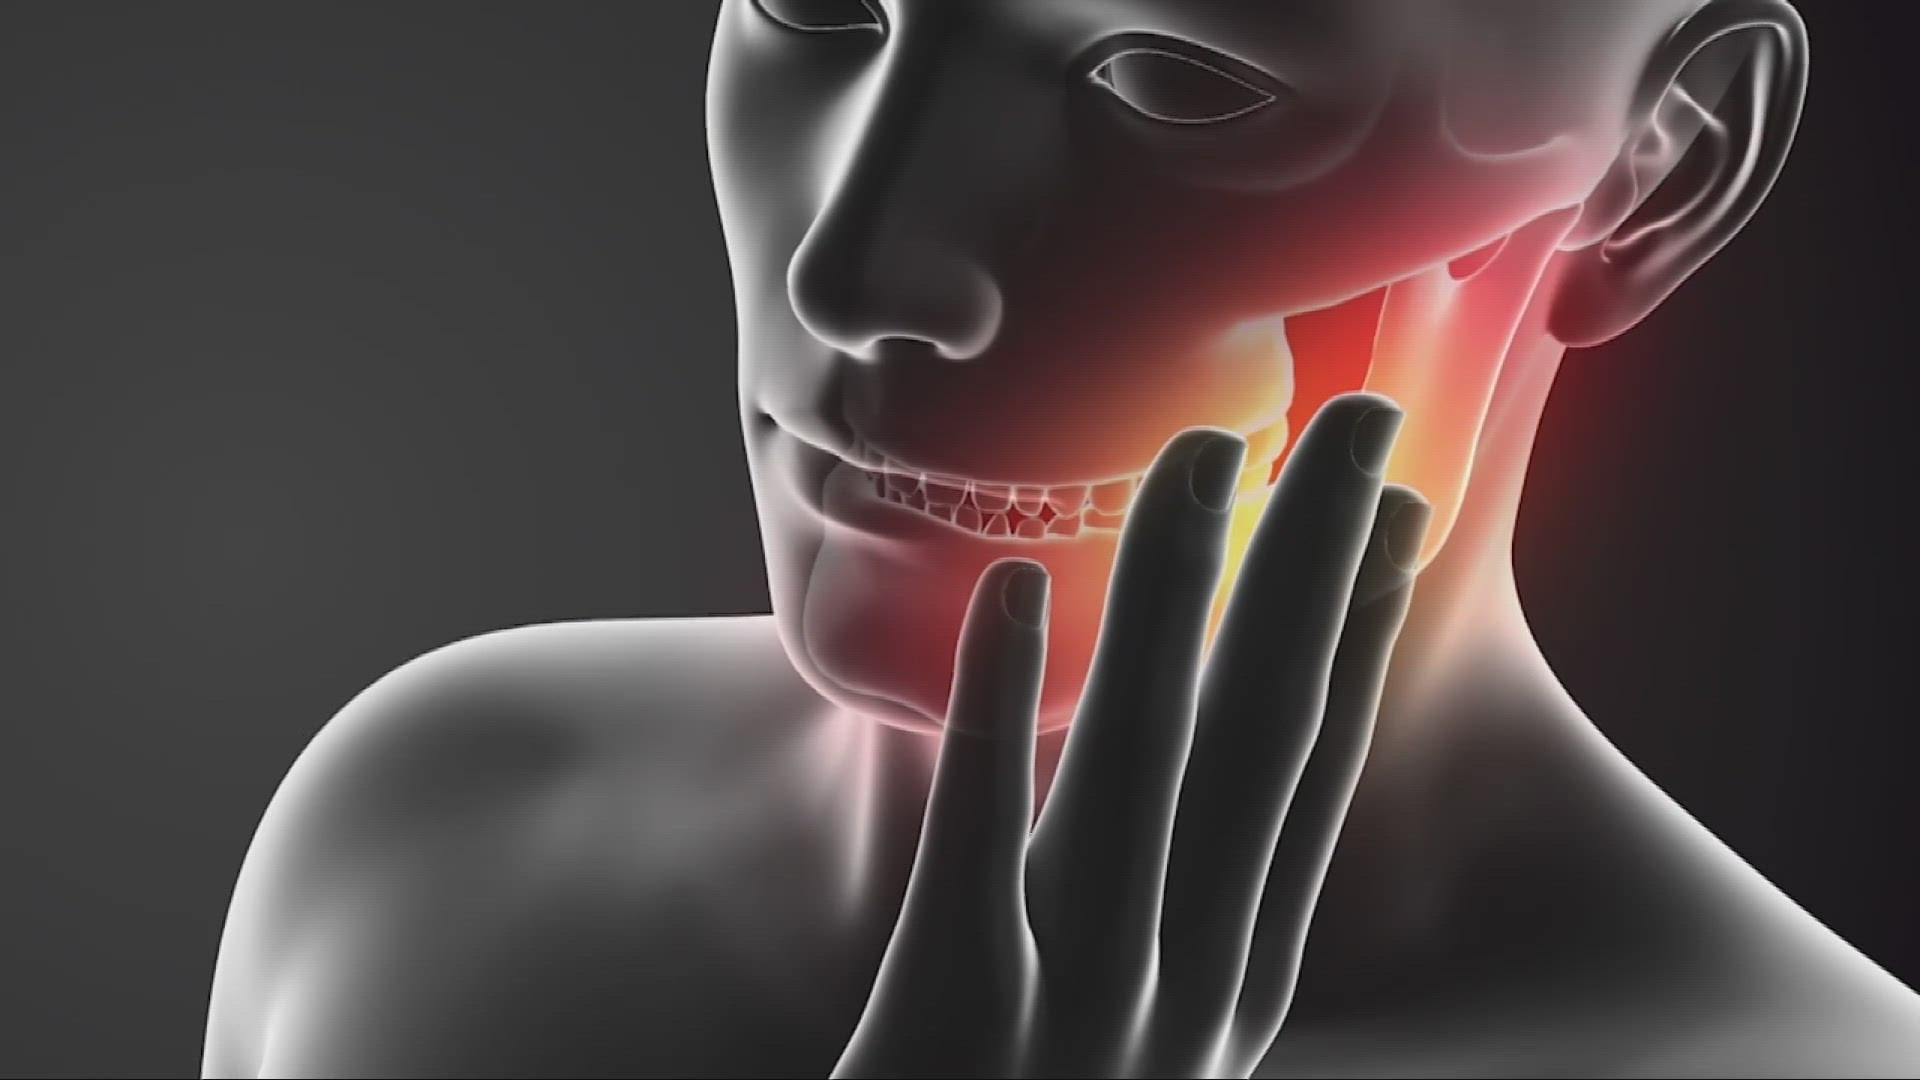 Clenching and grinding teeth, called bruxism, is on the rise, and as Consumer Reports explains, it can cause big problems if left untreated.